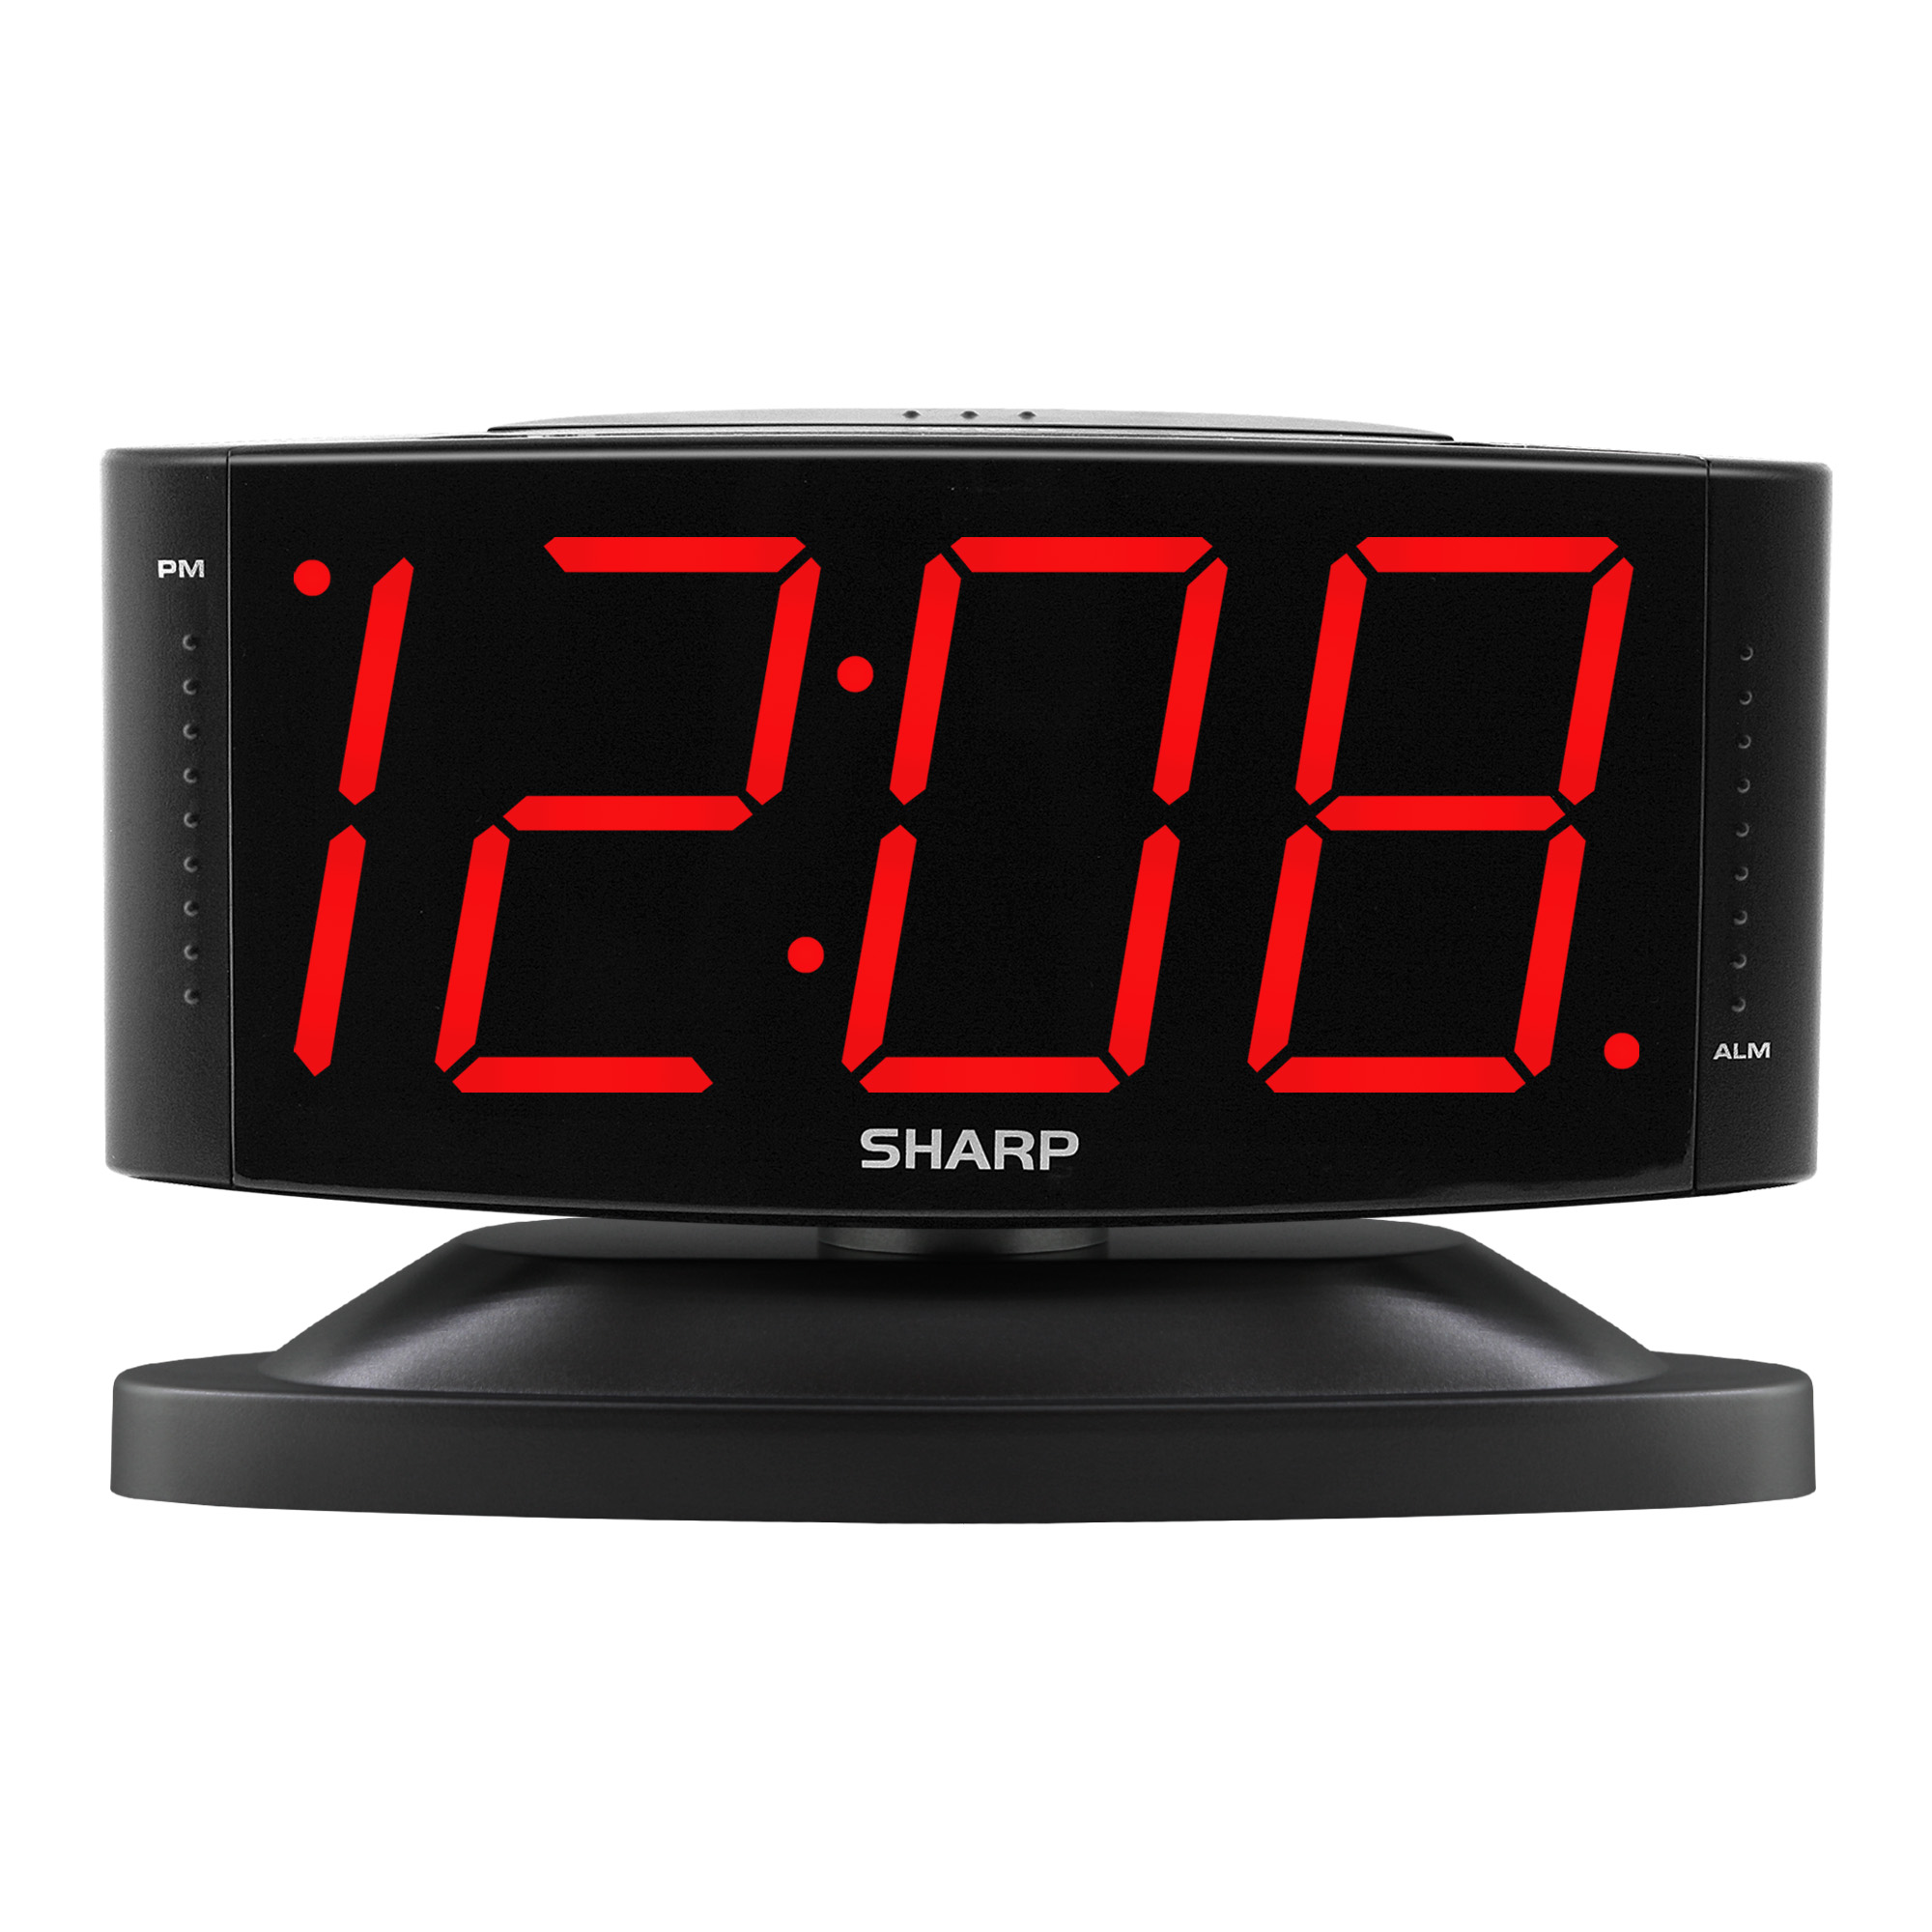 Alarm Clocks Home & Kitchen Alarm Clocks kudosprs.com Ascending Alarm Begins Faintly and  Grows Increasing Louder Sharp Digital Alarm Clock Battery Back-up Gentle  Wake Up Experience Easy to Use with Simple Operation Black -